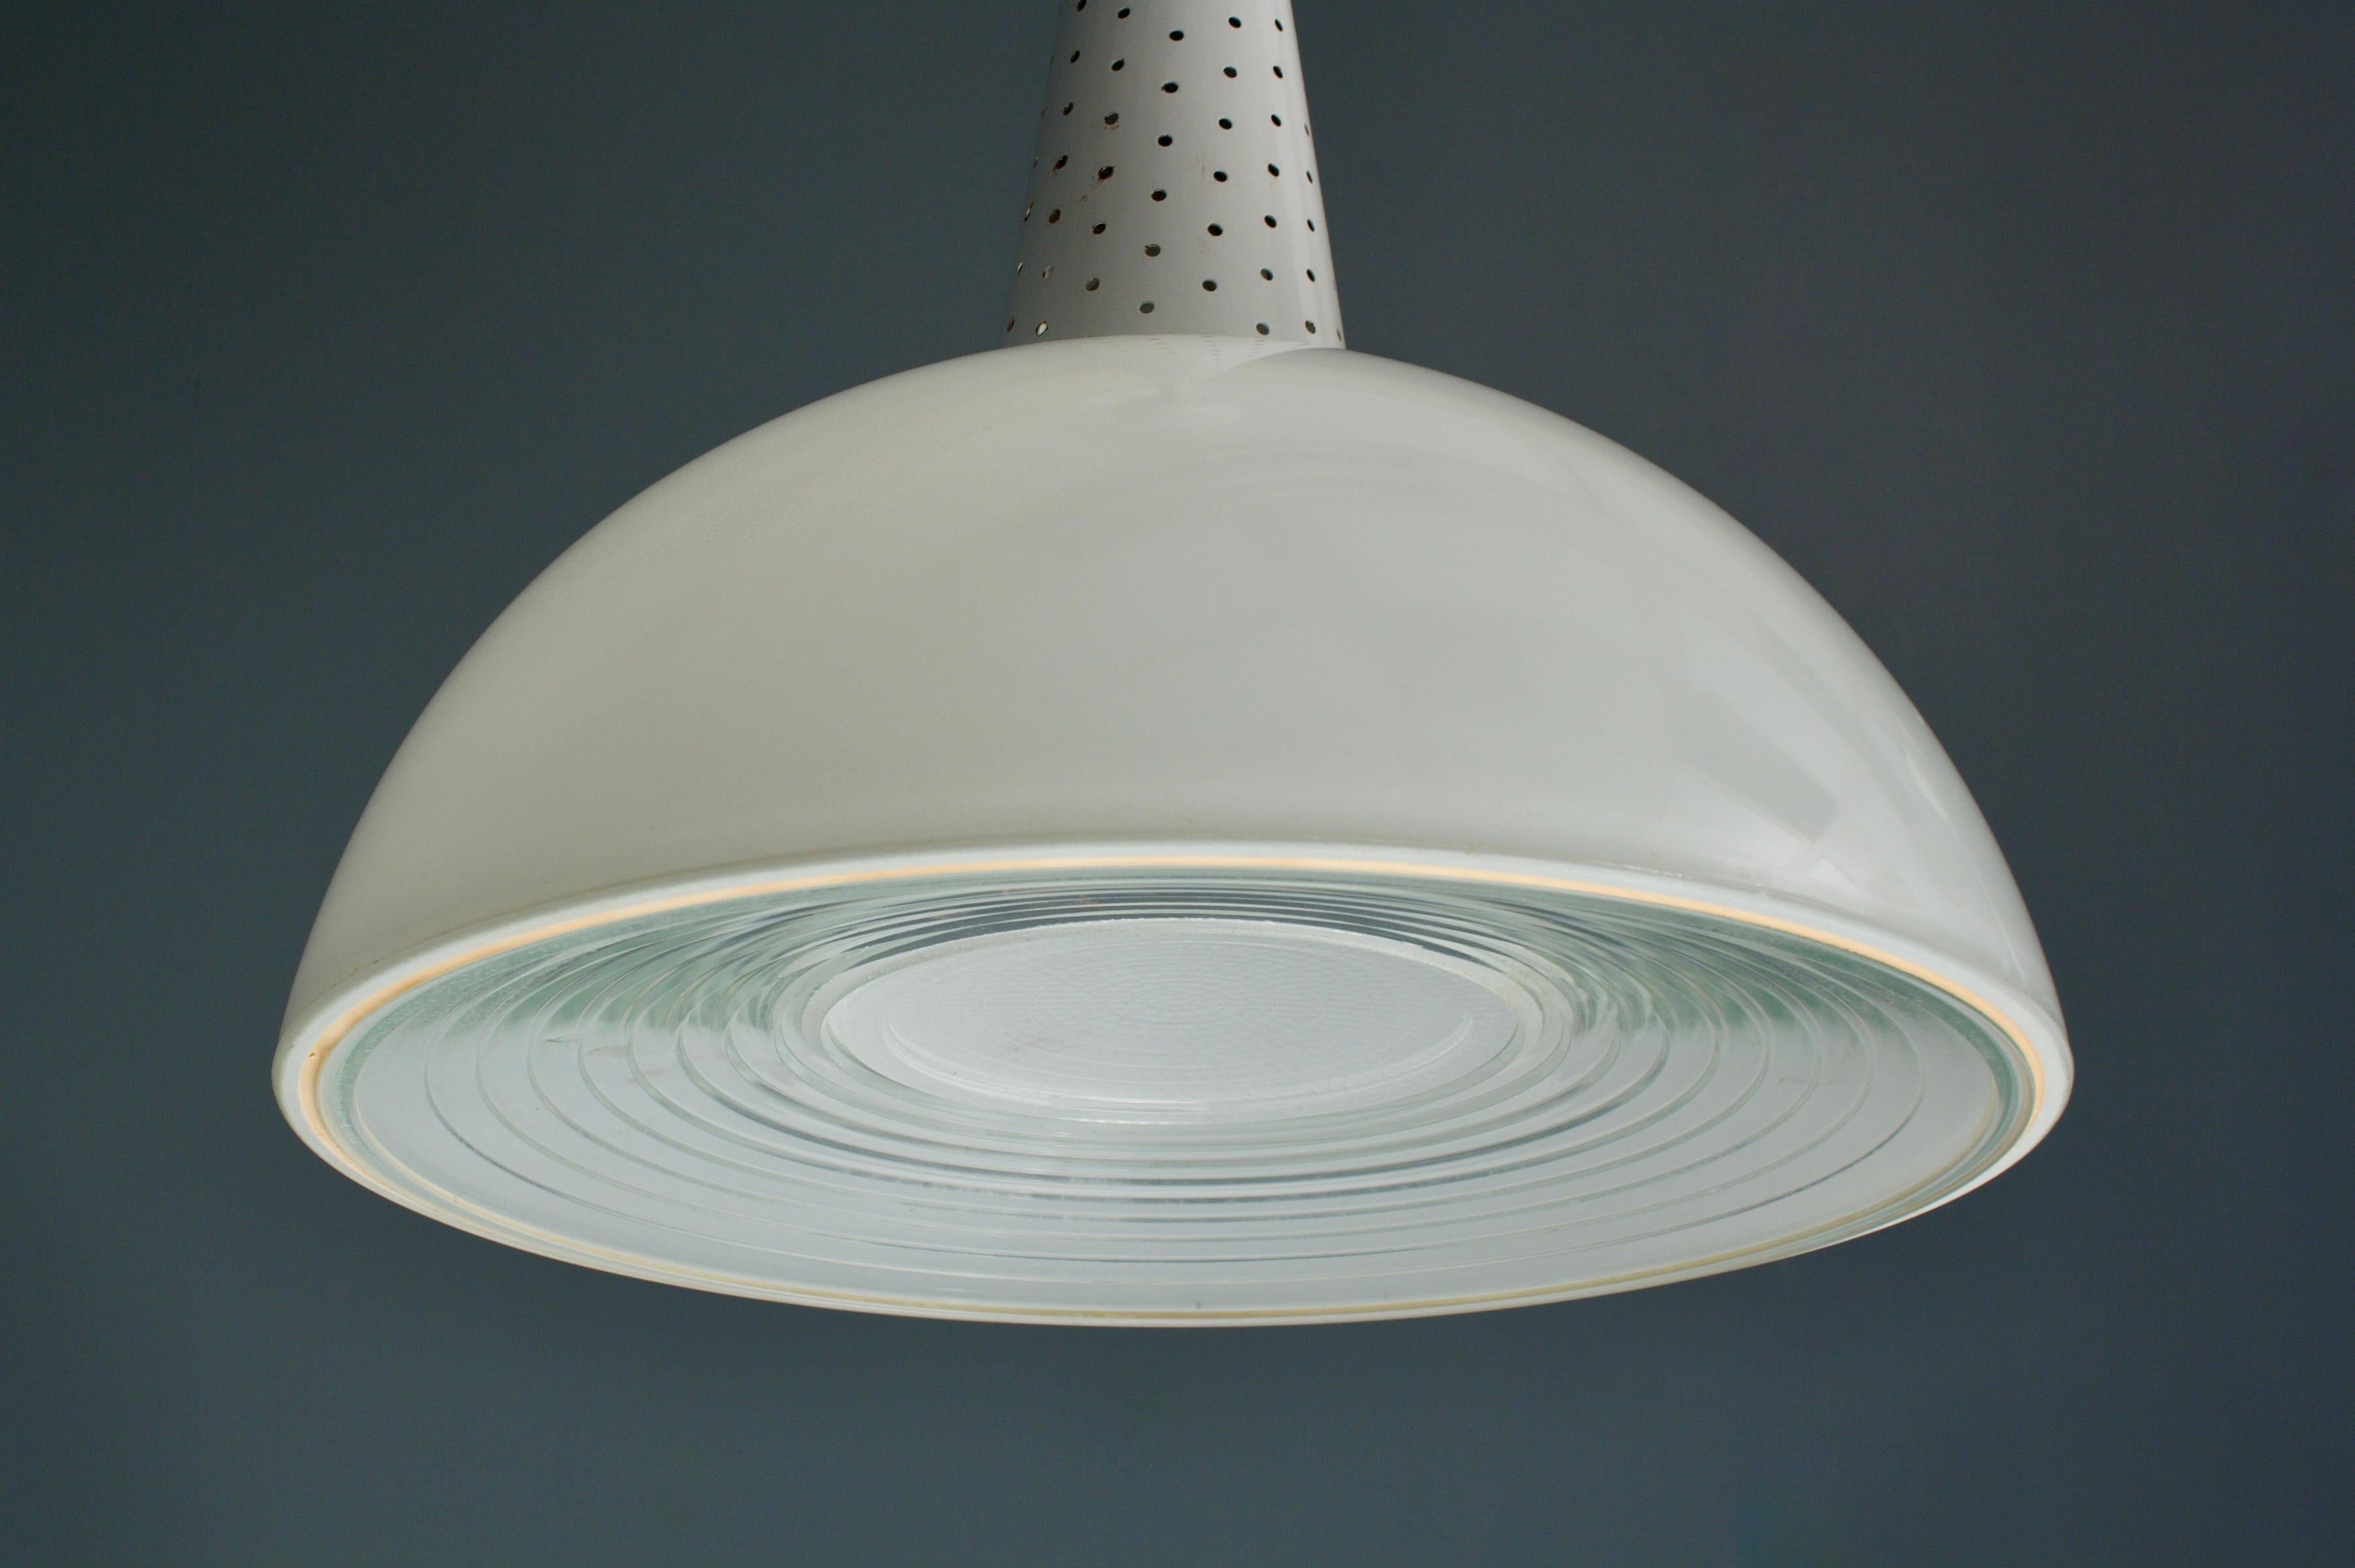 Set of 4 Mathieu Mategot for Holophane Ceiling Lamps in Metal and Glass, 1950's For Sale 4